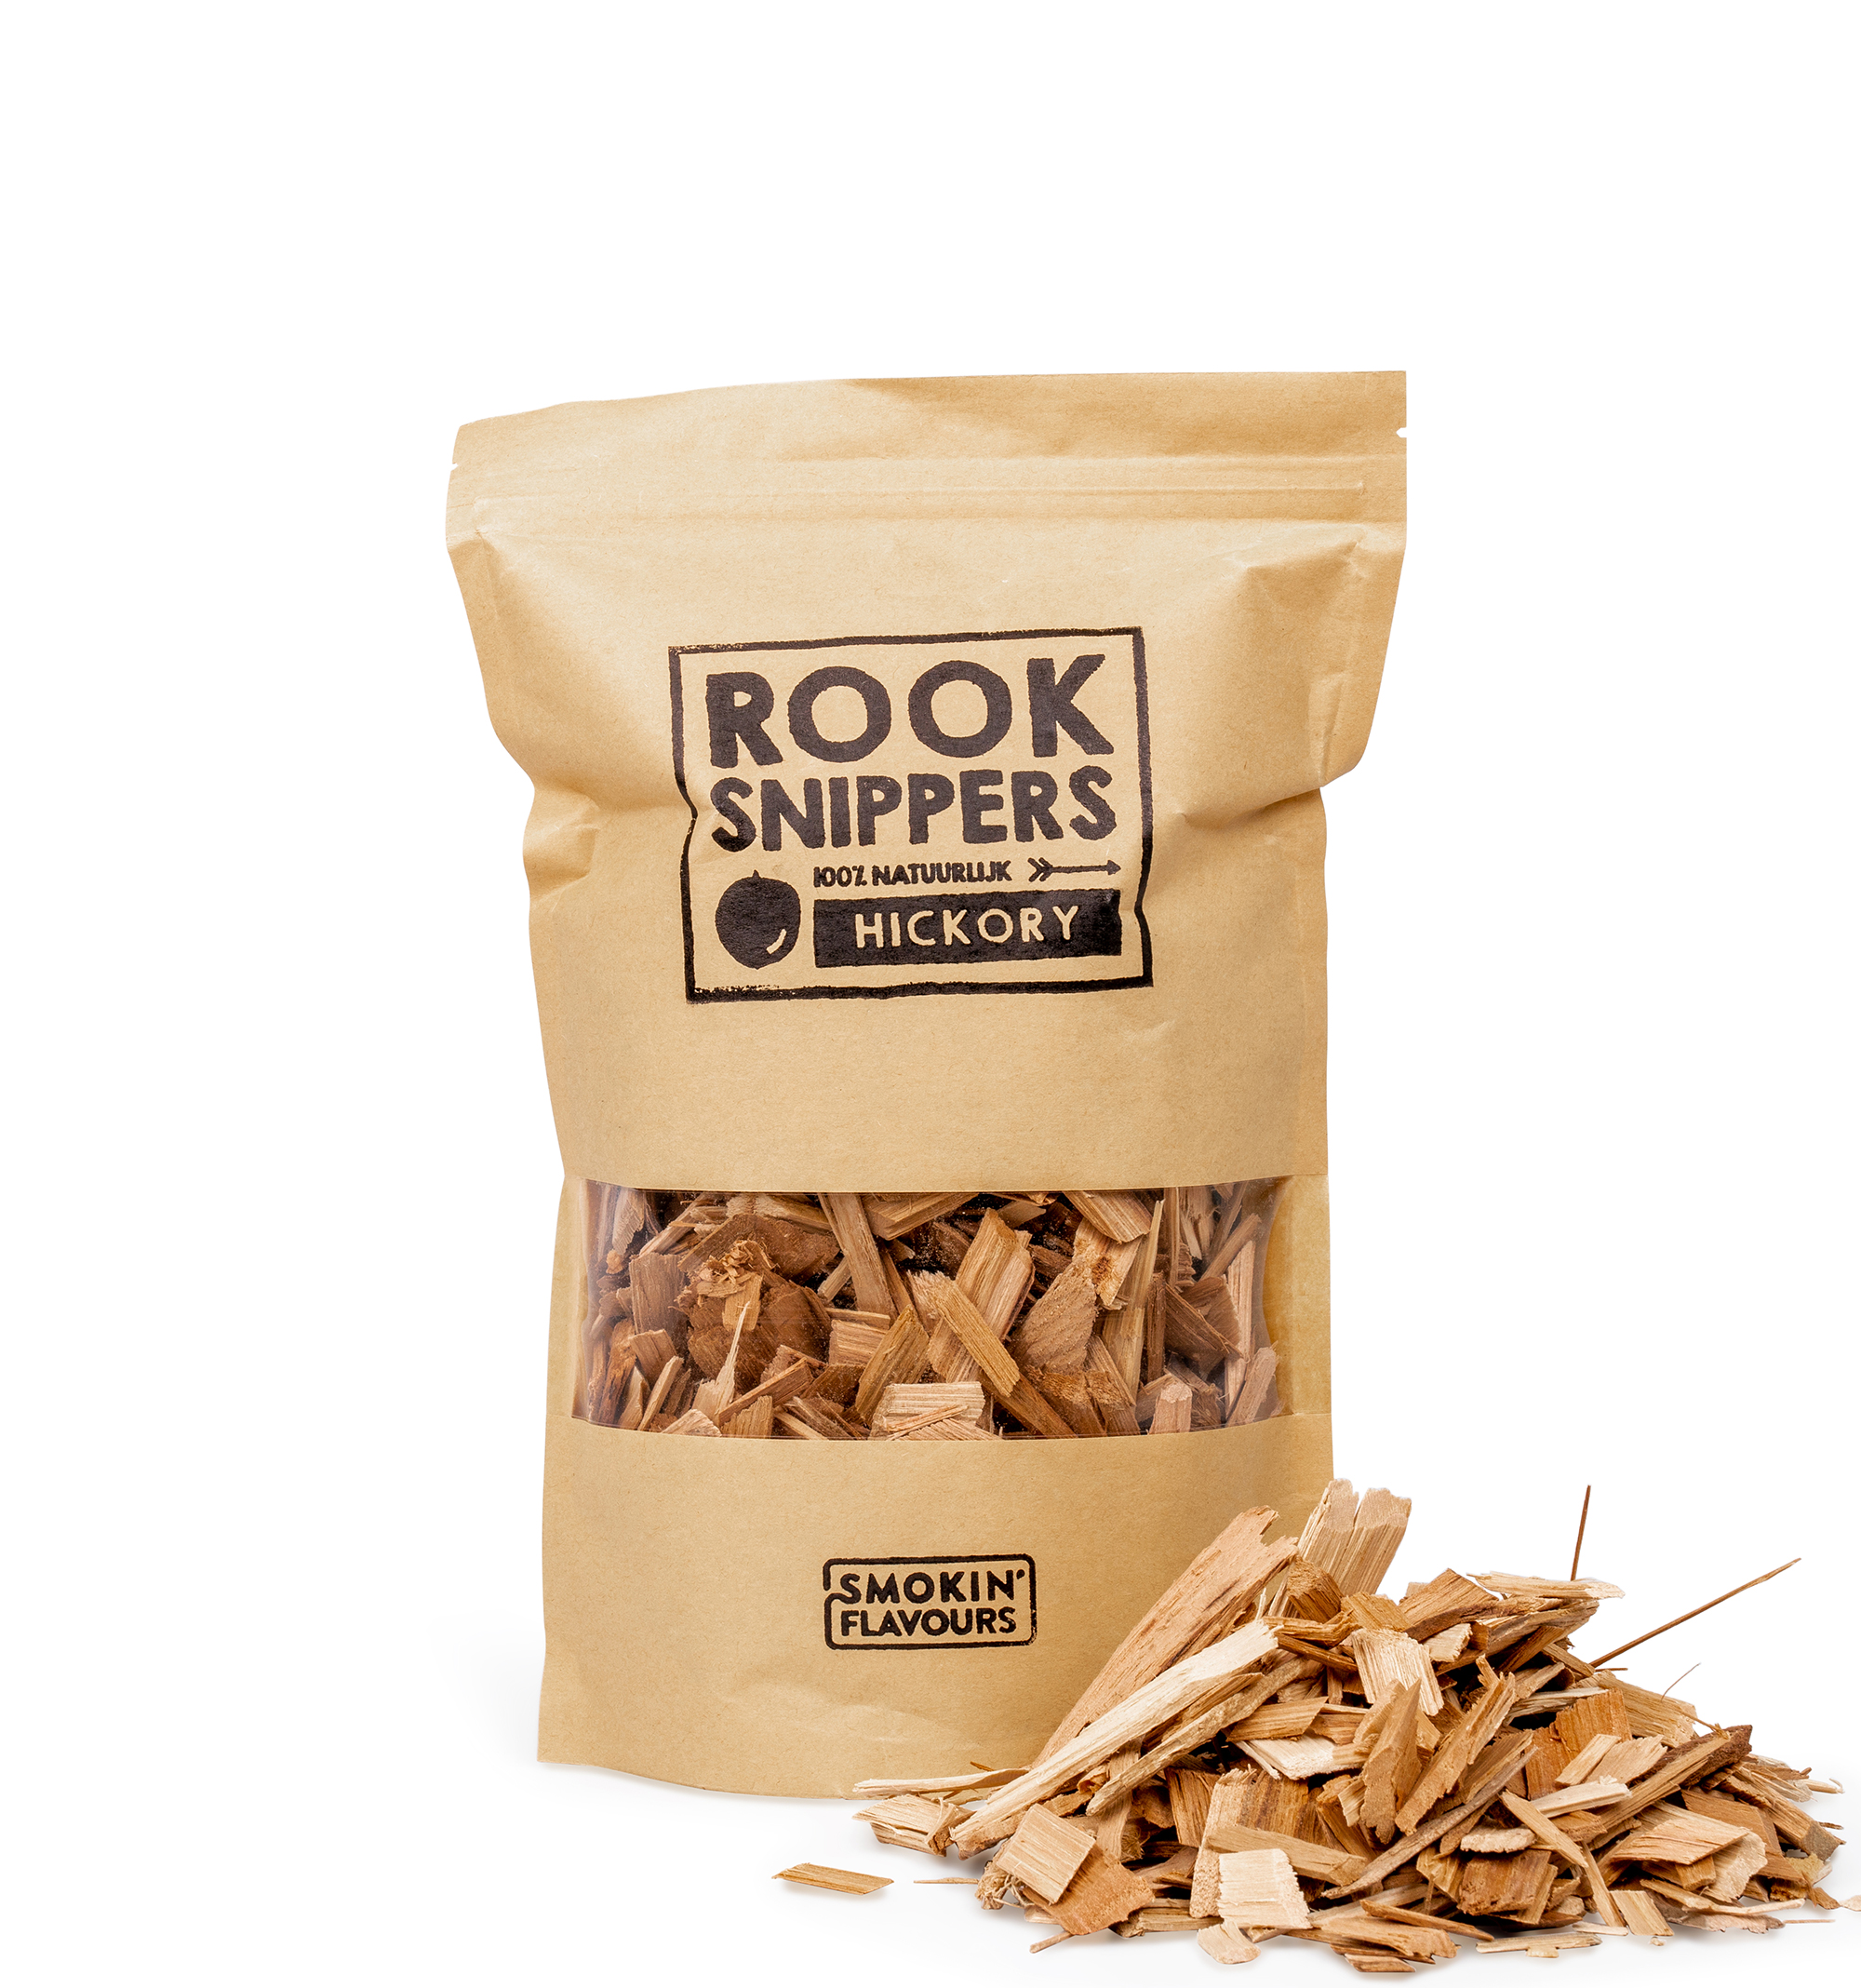 Smoking Flavours rooksnippers hickory